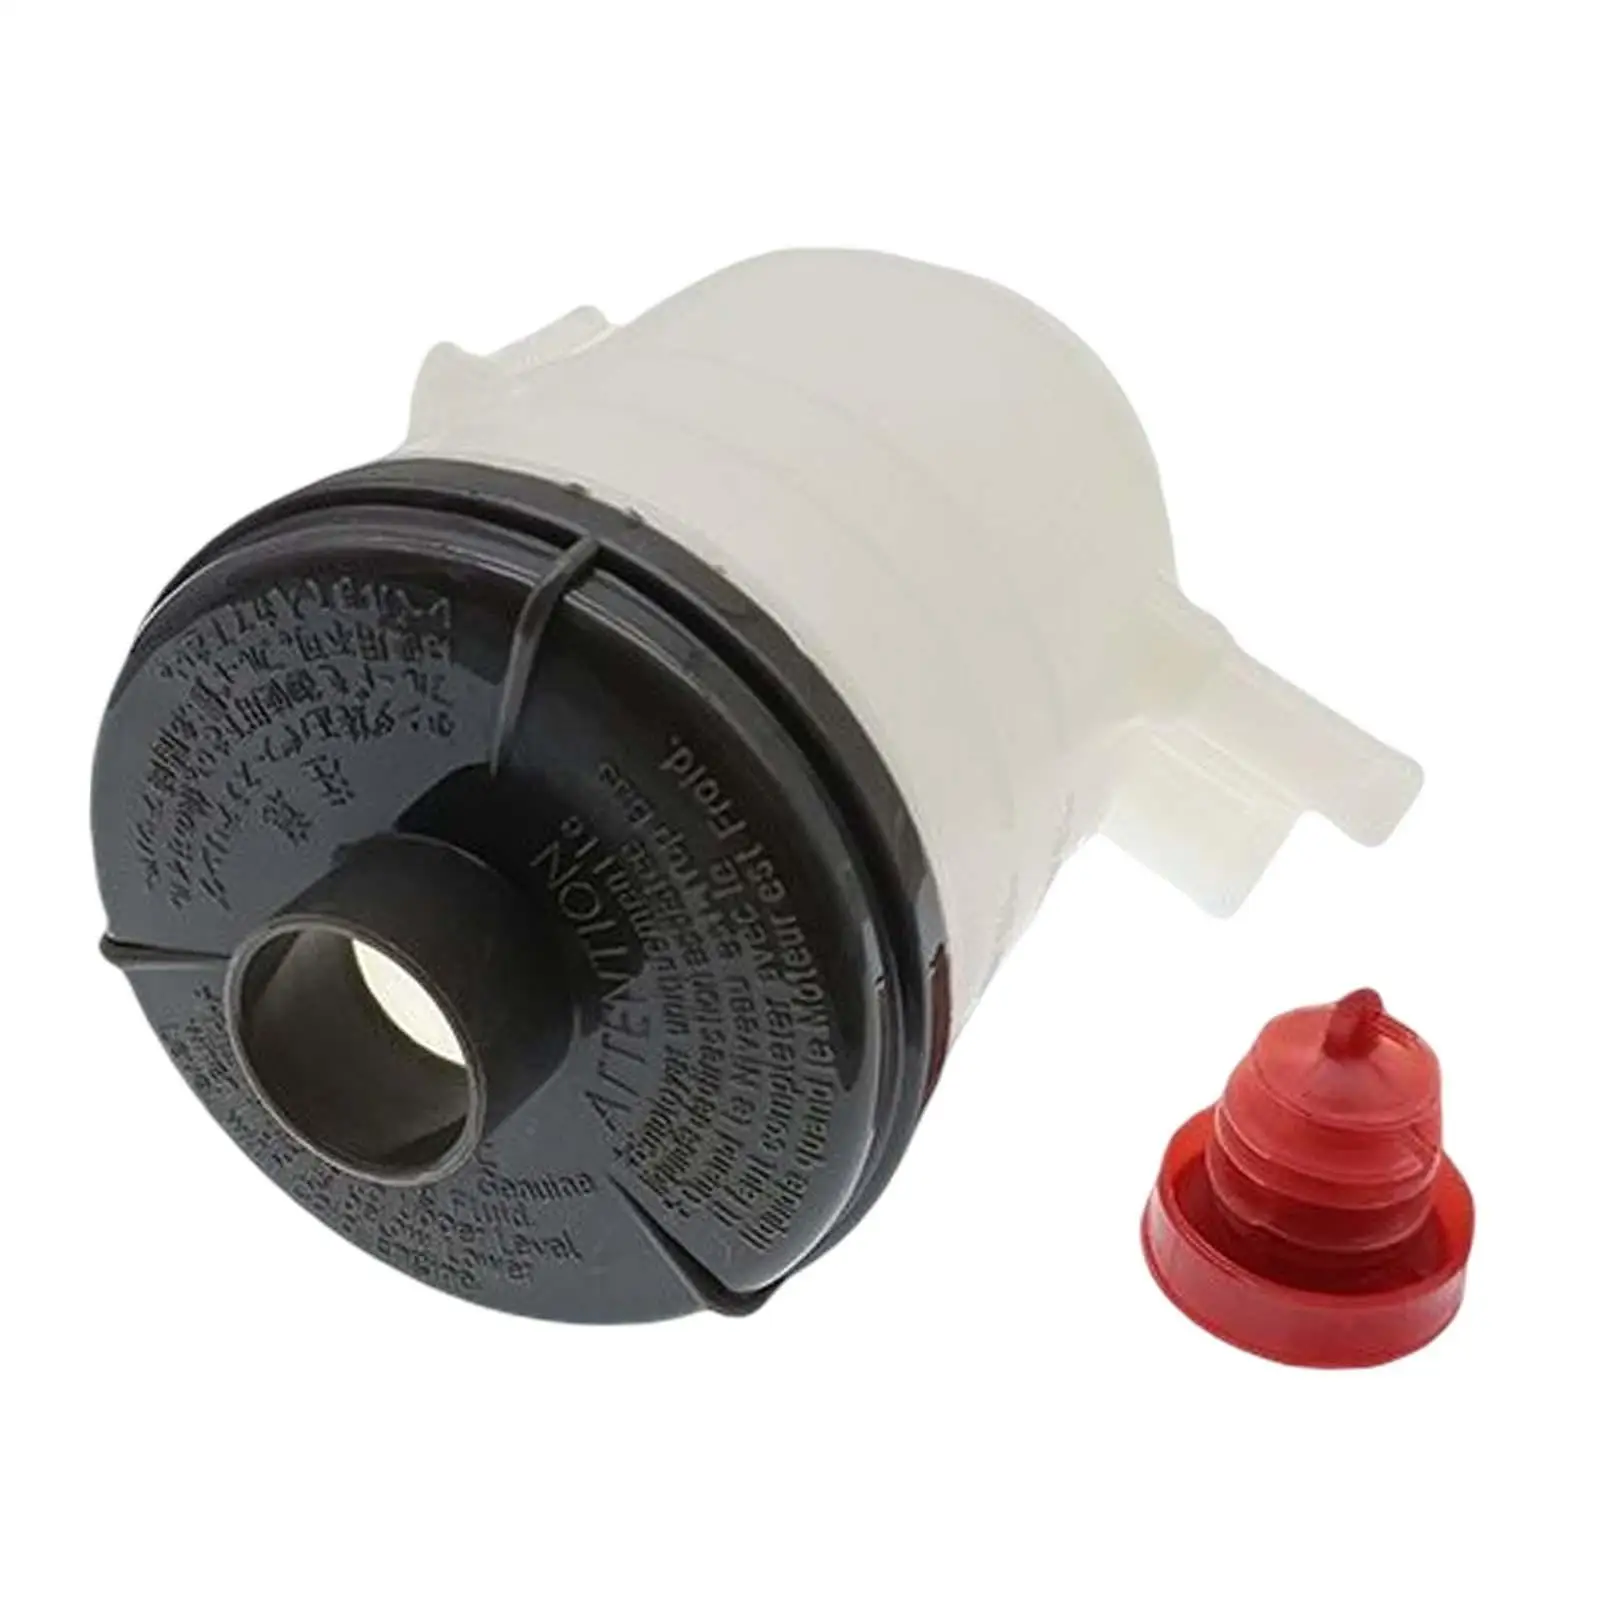 

Booster Pump Oil Cup Accessory Replaces Easy to Install Practical Power Steering Pump Reservoir for Honda Accord 98-02